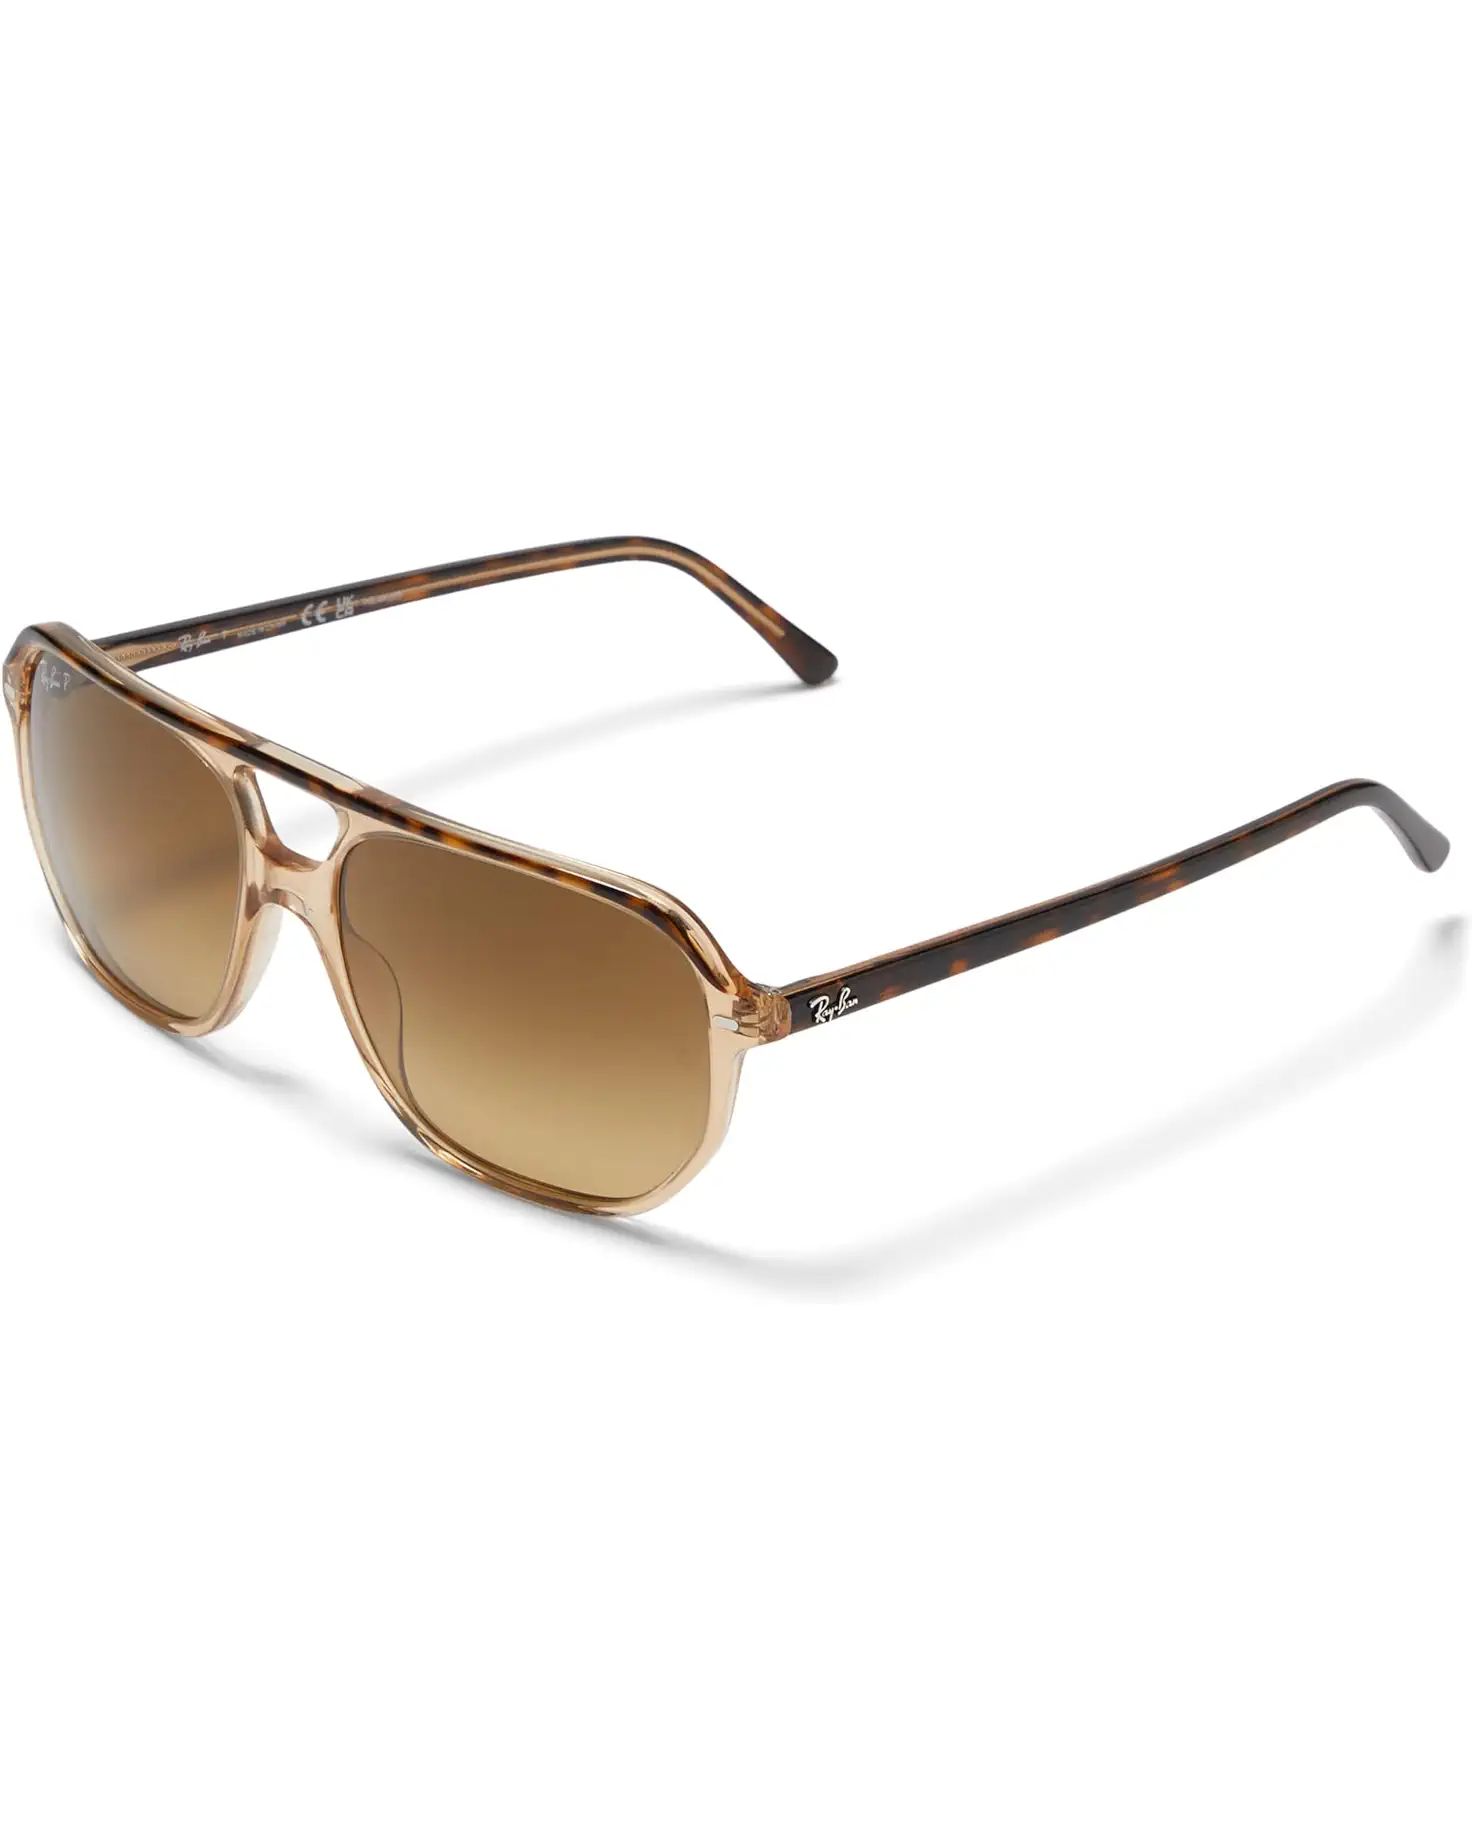 Ray-Ban Bill One | Zappos